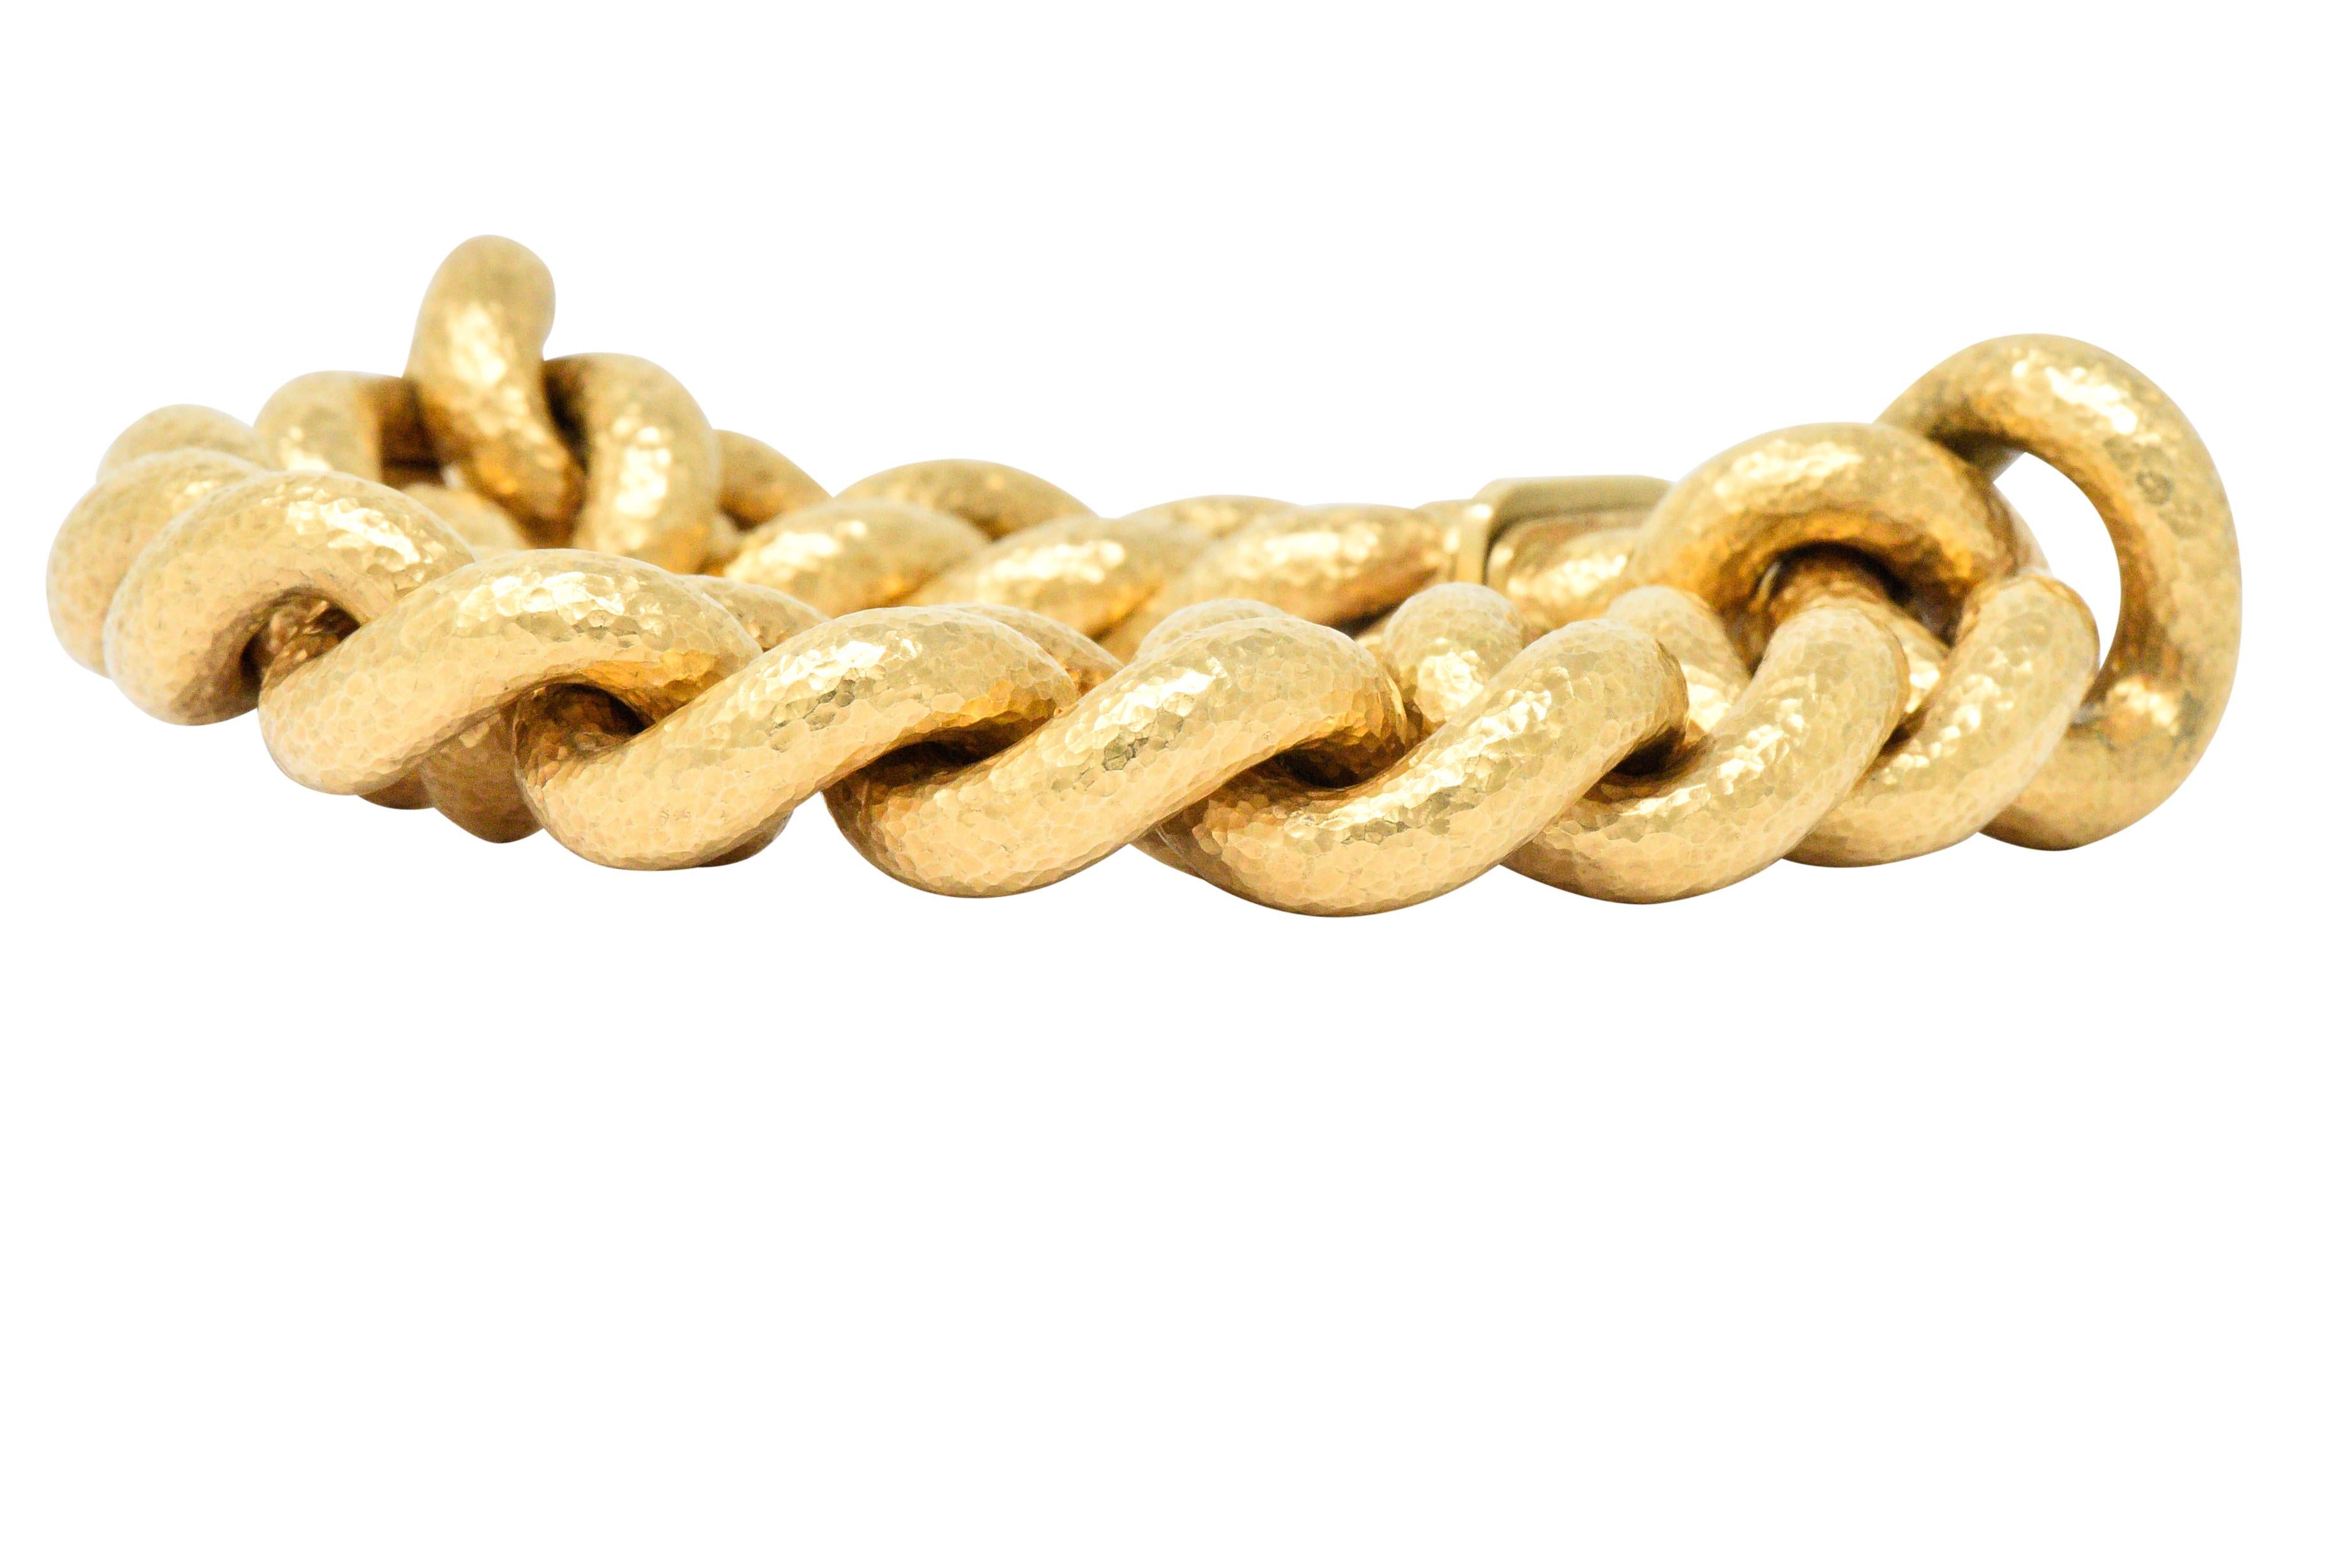 Hammered solid gold curb links

Concealed clasp with double figure-eight safety with maker's mark

Rich gold with a lovely hefty feel

Length: 8 Inches

Width: 3/4 Inch

Total Weight: 93.7 Grams

Chic. Solid. Rich. 

We- 1442